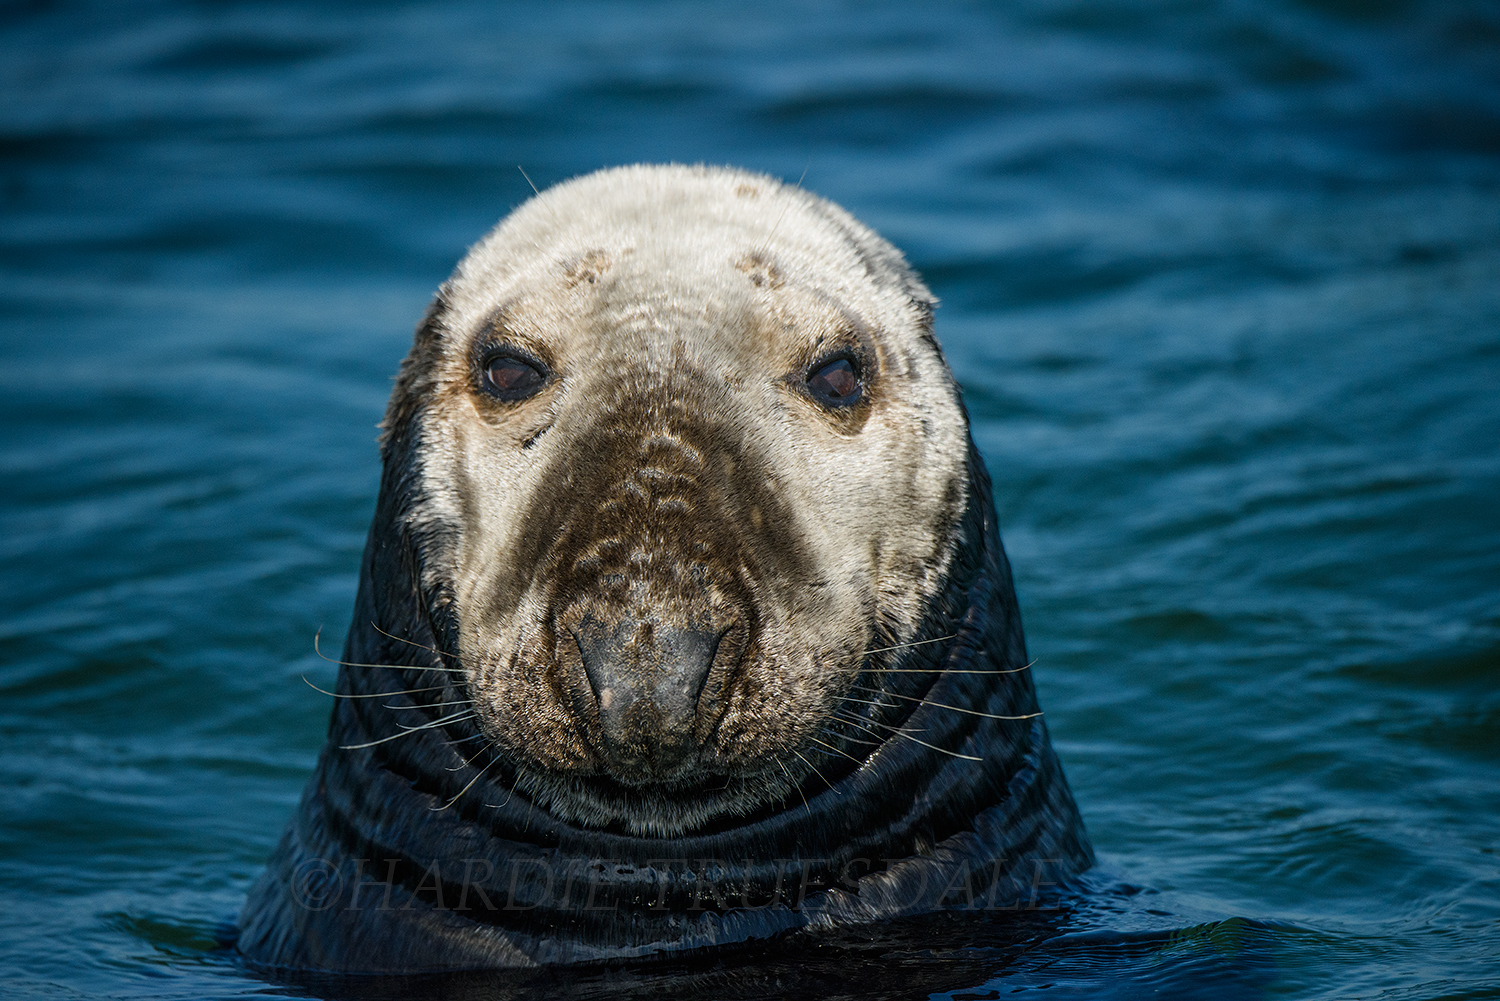 CC#137 "Up Close and Personal with a Grey Seal"